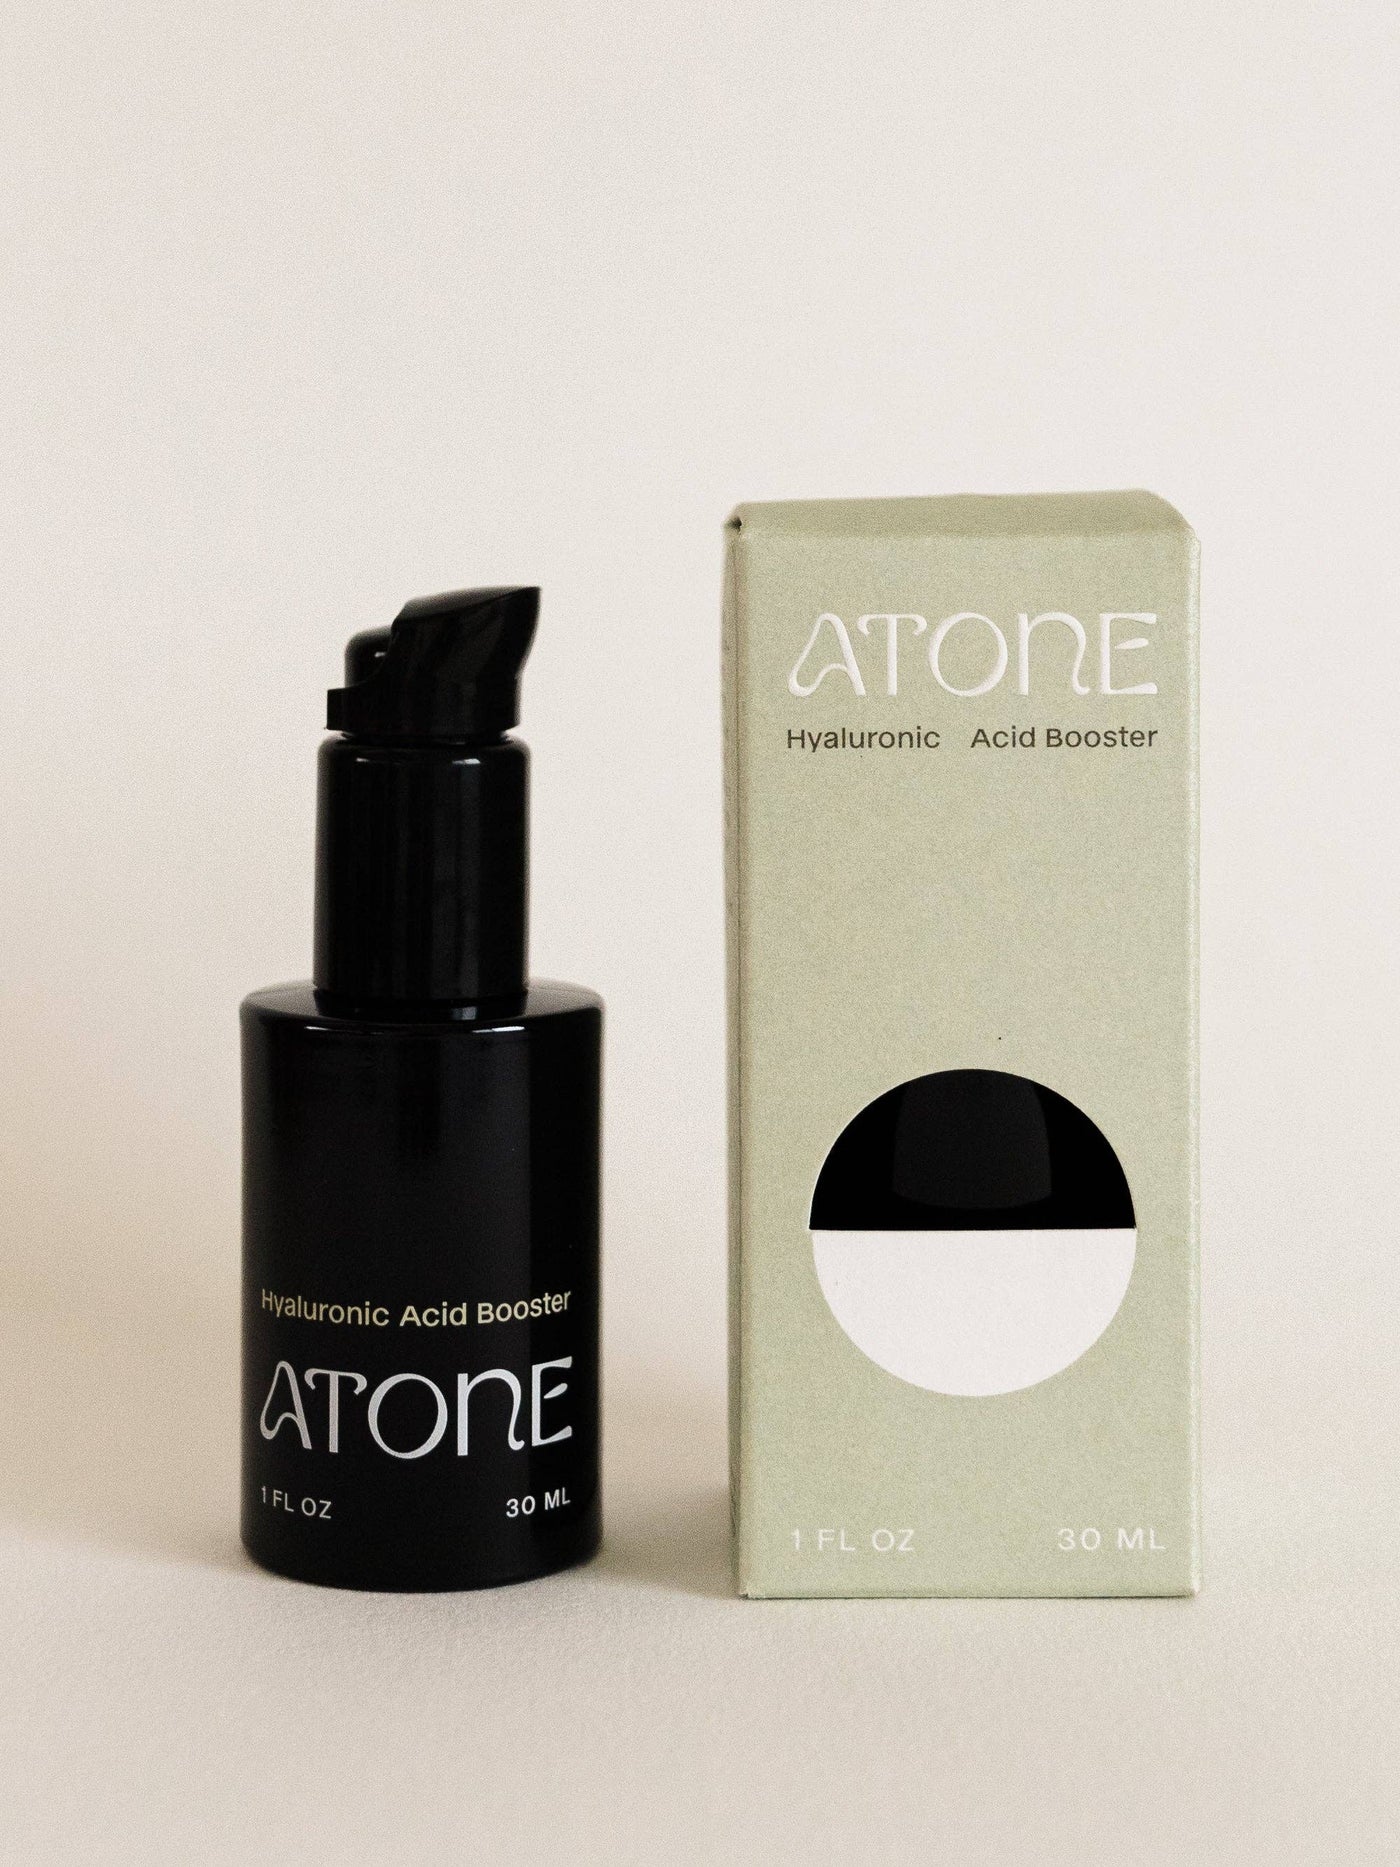 Atone - Hyaluronic Acid Booster